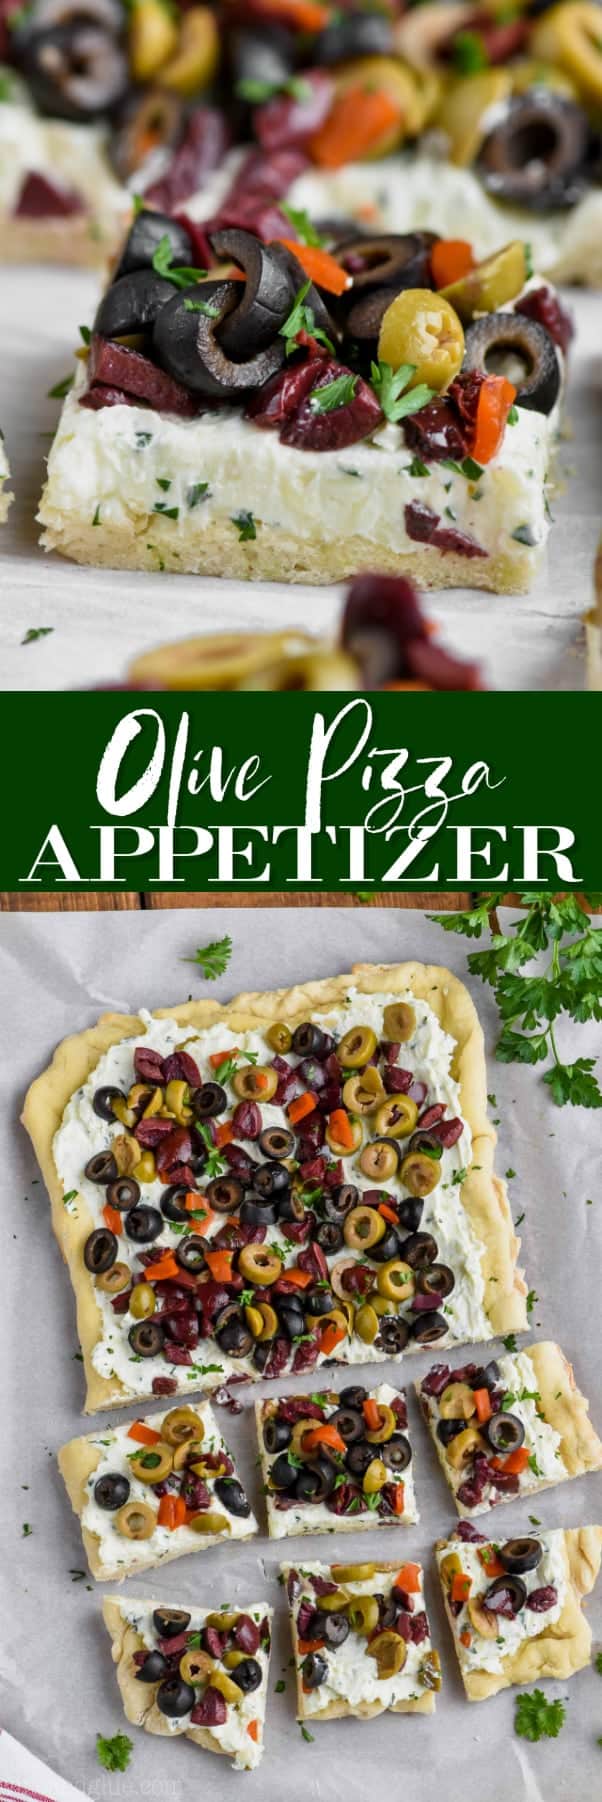 piece of olive pizza appetizer recipe garnished with parsley